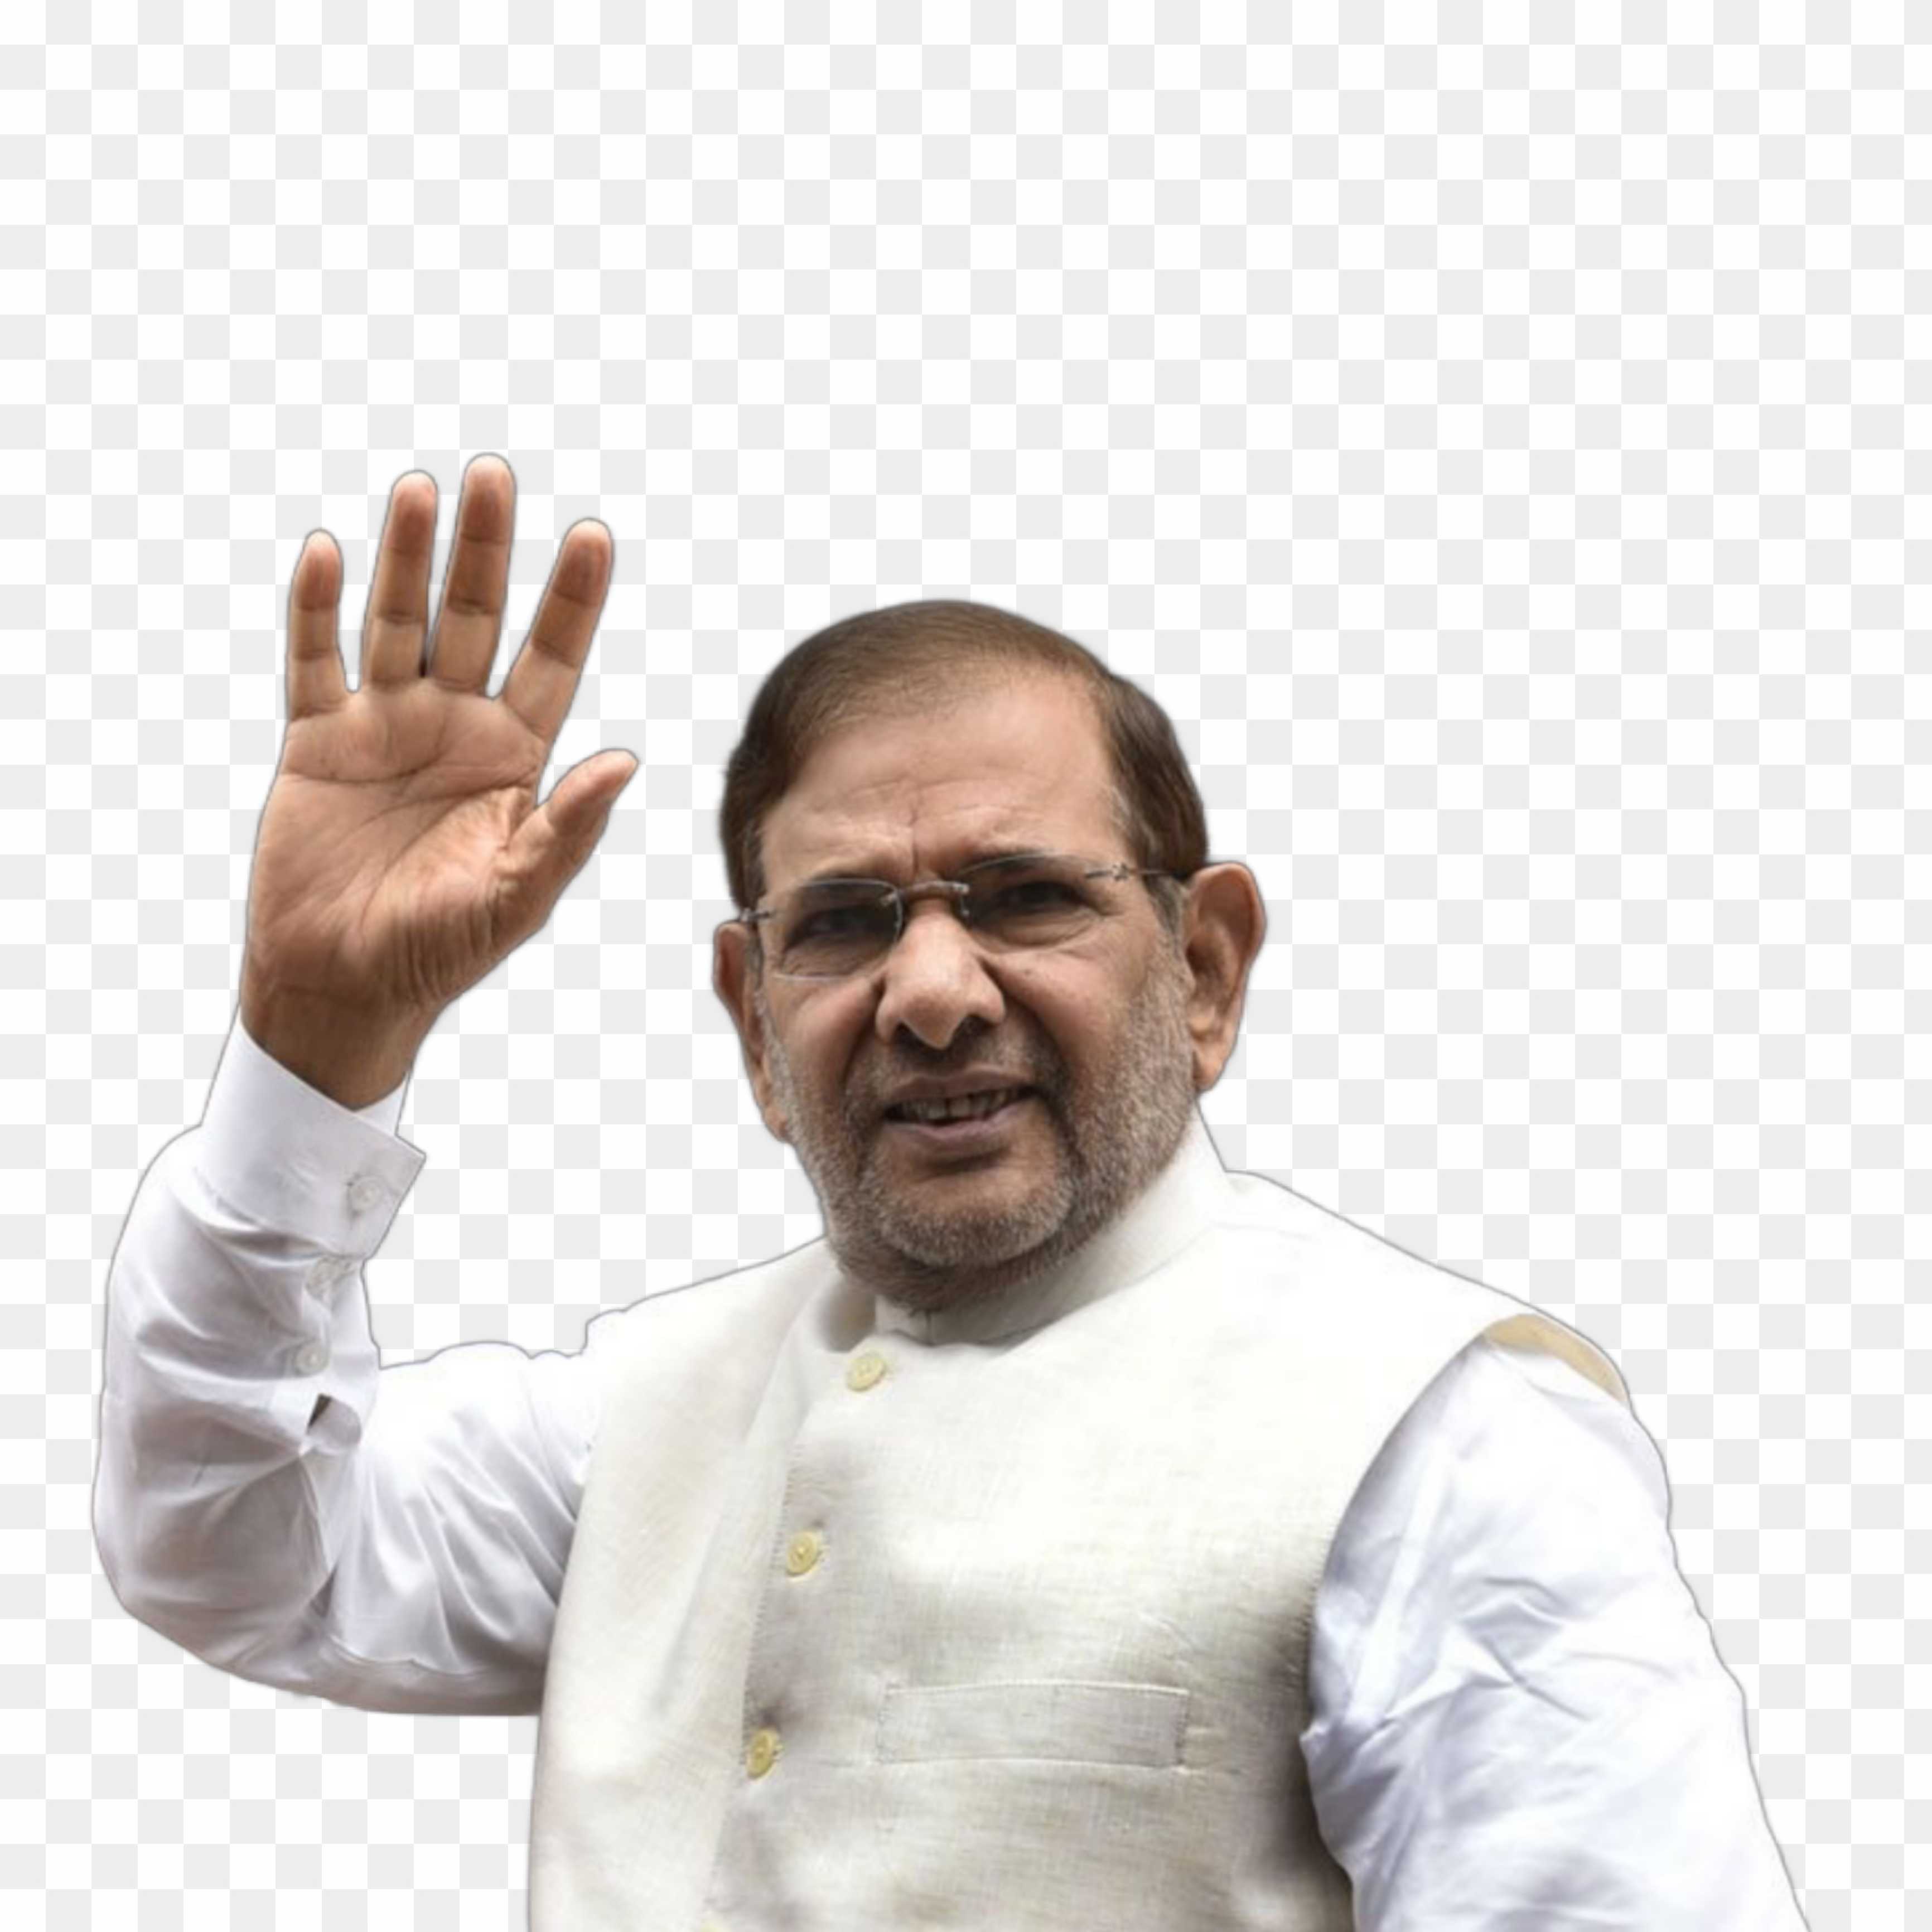 Sharad Yadav Died: Sharad Yadav, the well-known Indian politician, was a legend in his own time. His contributions to Indian politics are unmatchable, and his legacy lives on through his followers. Celebrate his life and achievements by watching this tribute to Sharad Yadav.